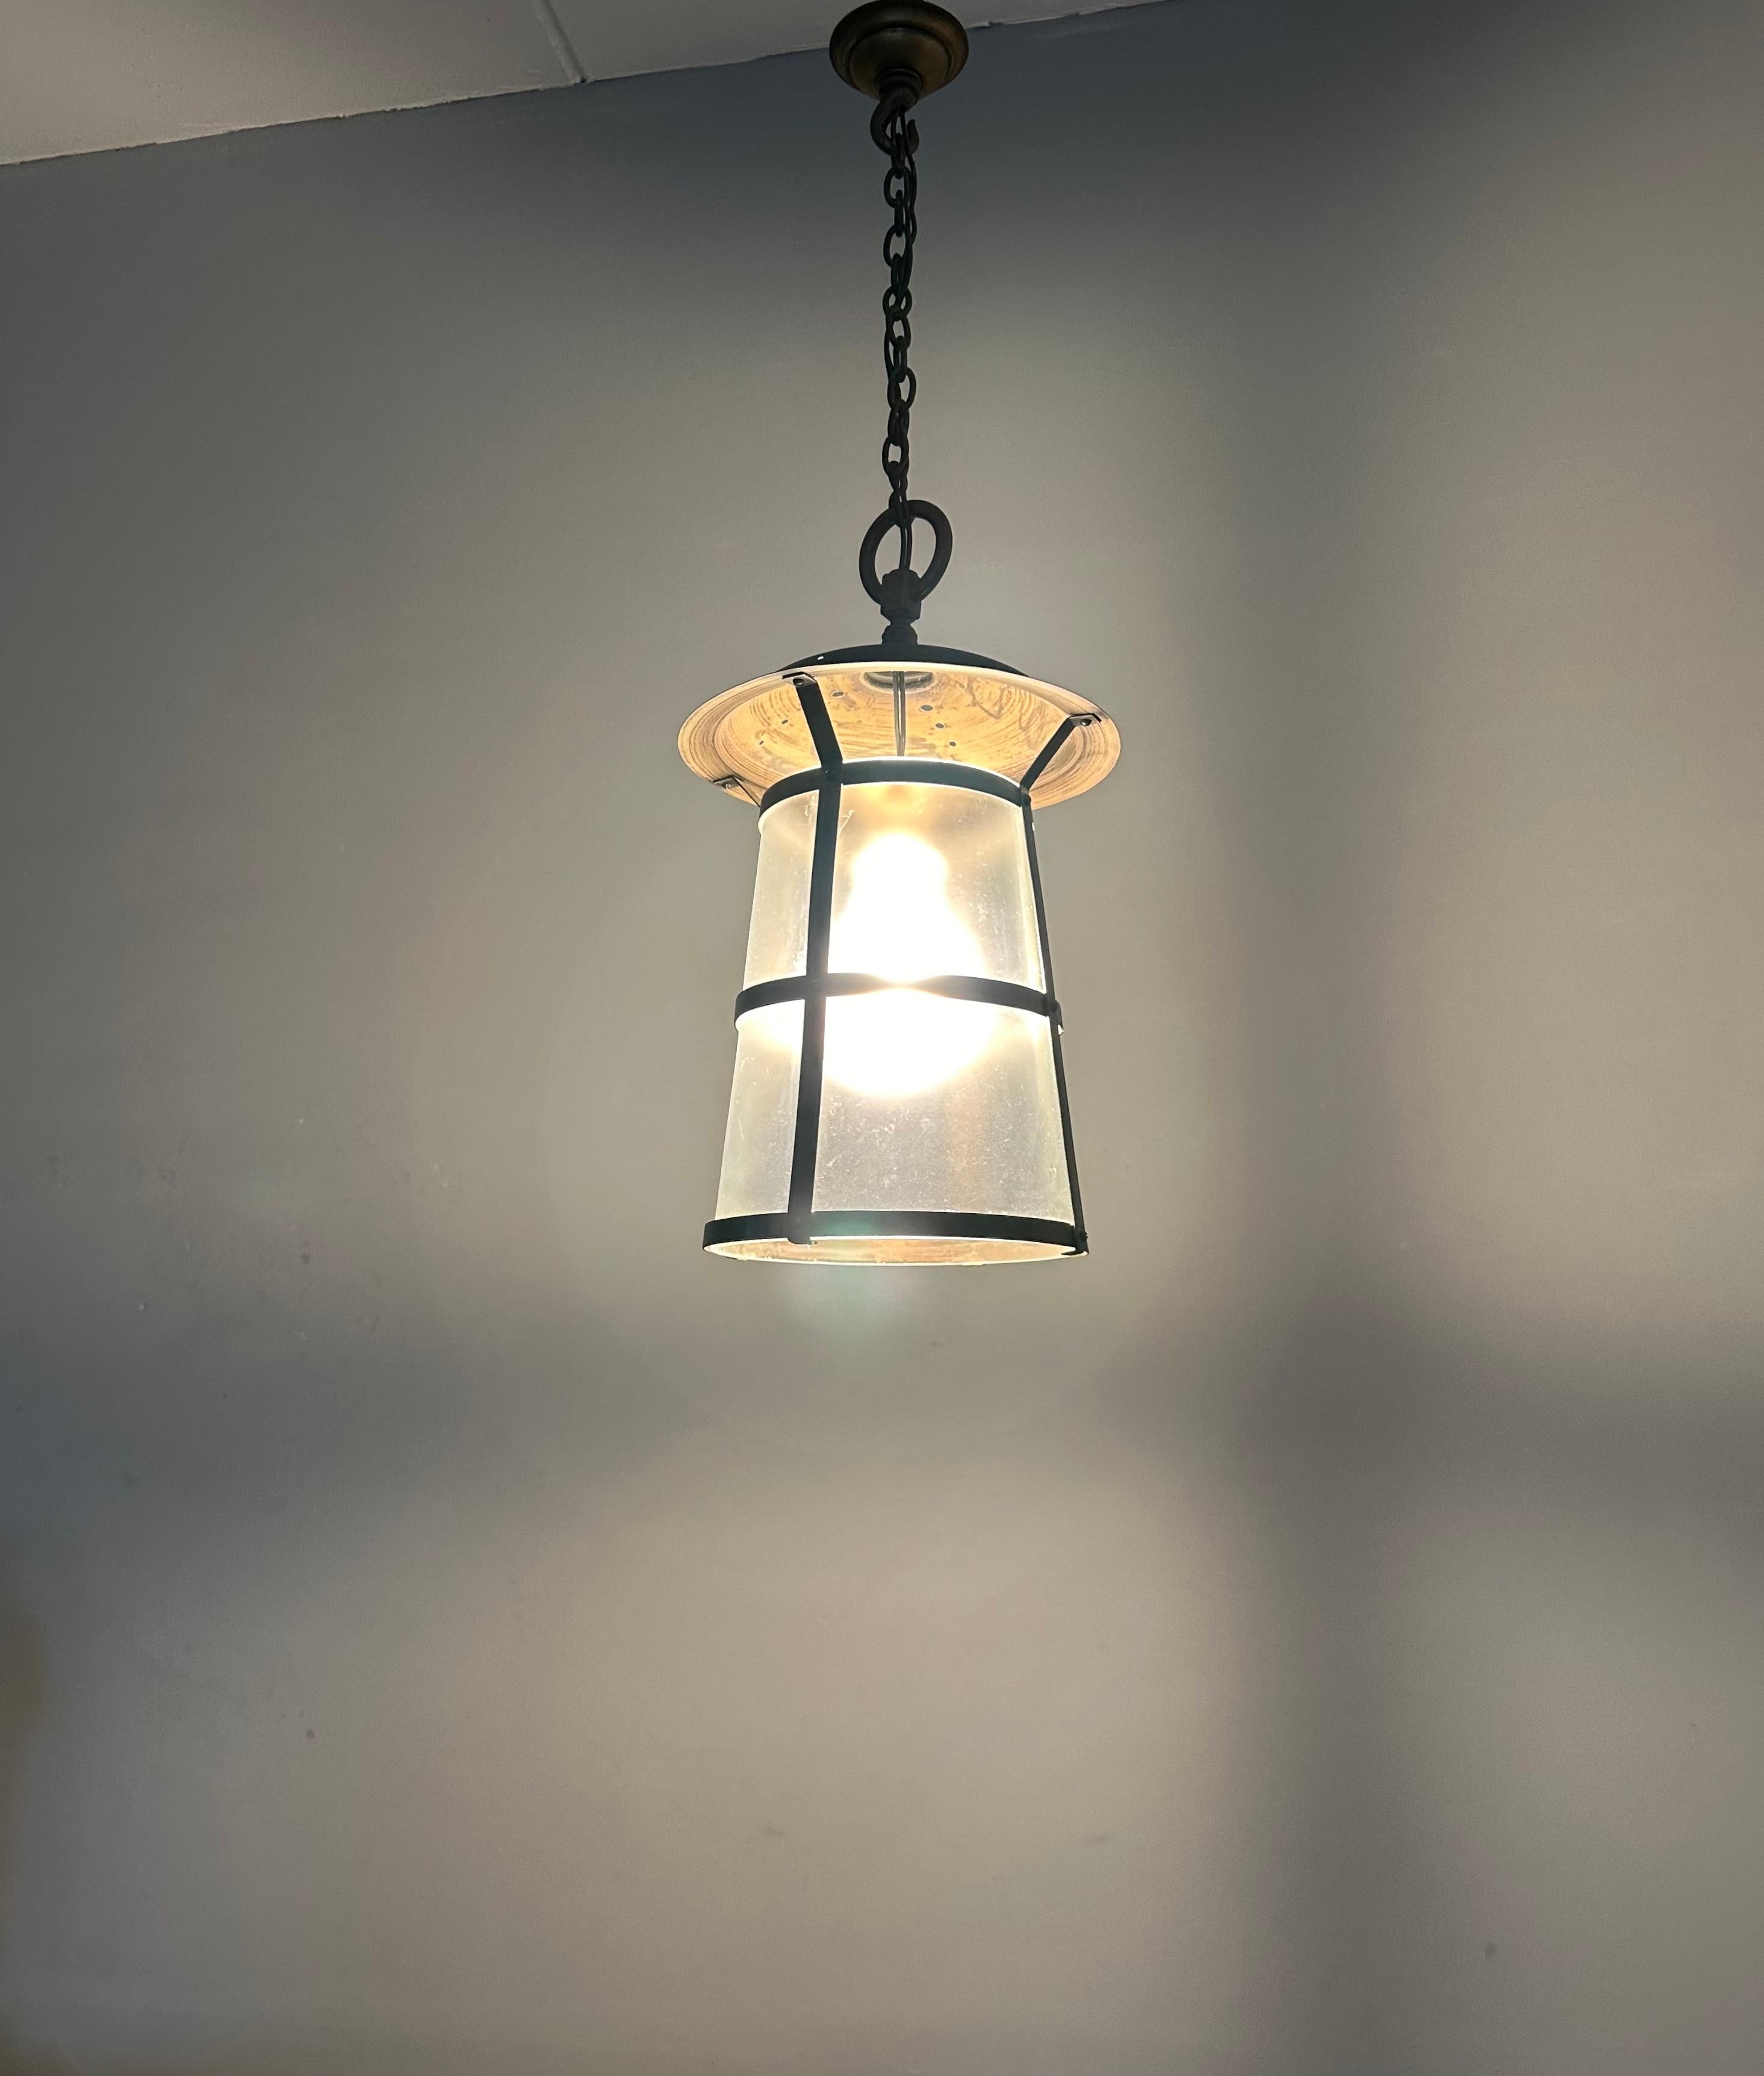 Highly Stylish Brass and Glass Arts & Crafts Pendant Light, 1910 Berlage Style For Sale 6